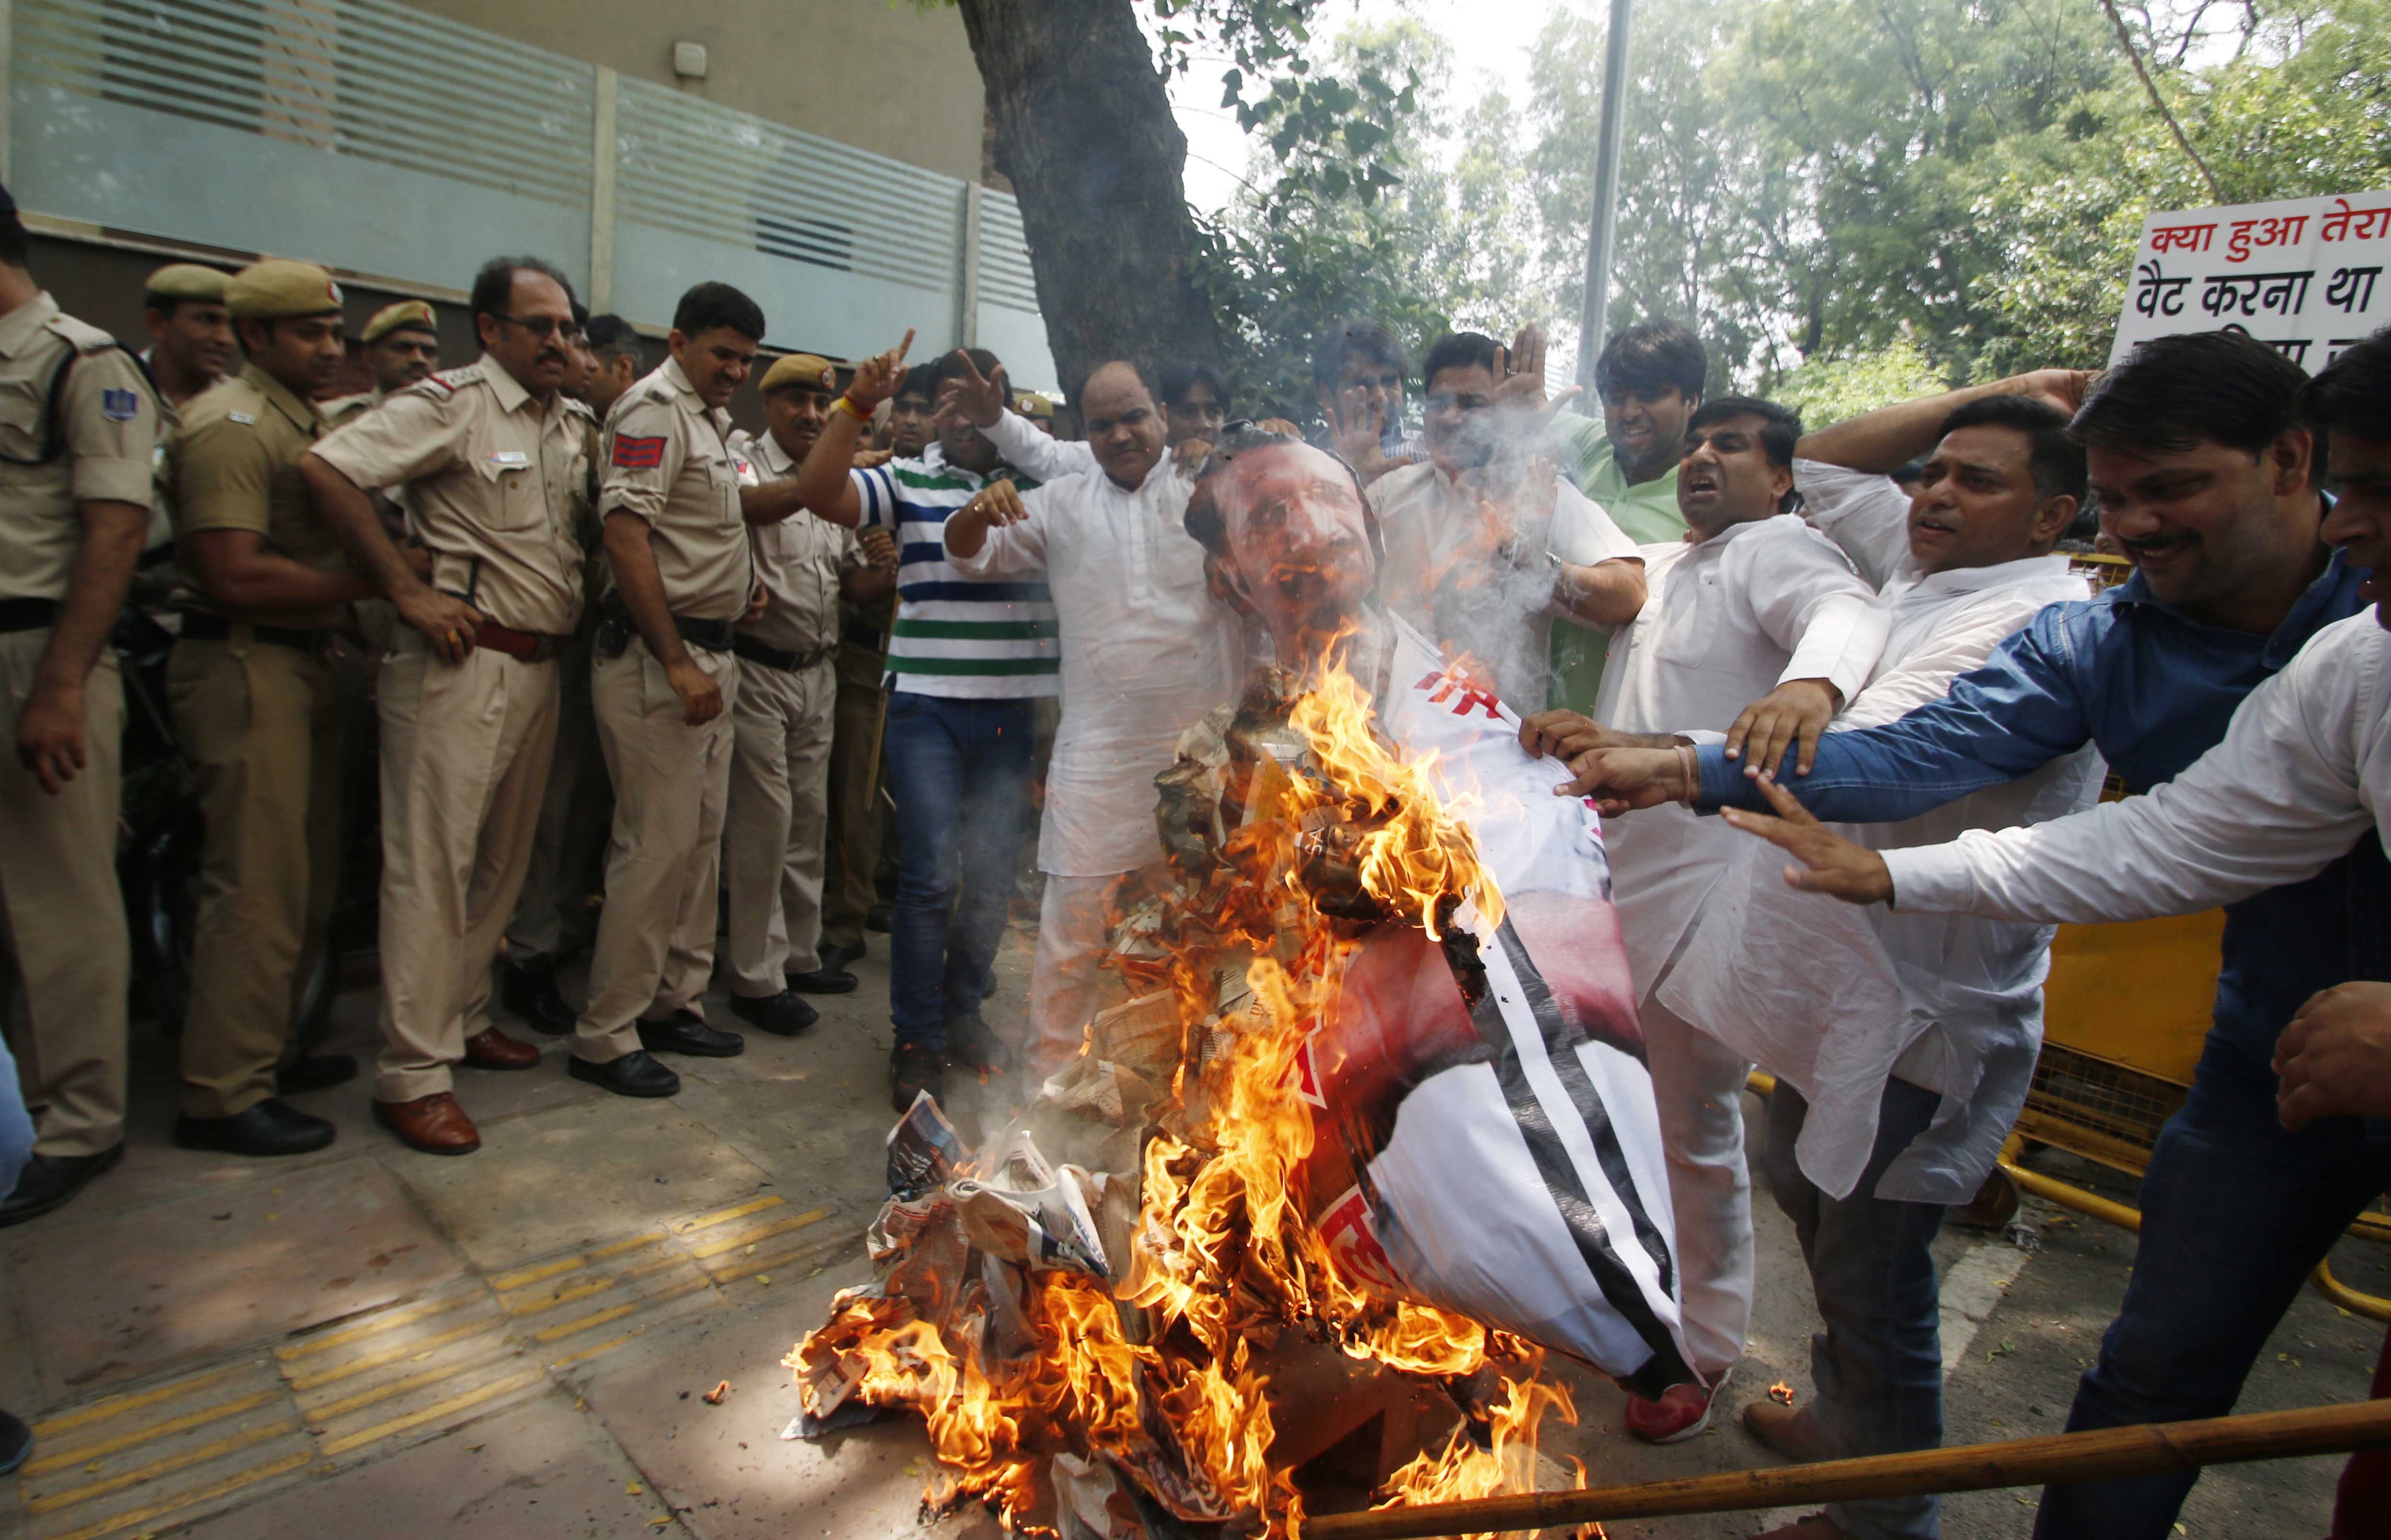 Youth Congress workers protest against Delhi Chief Minister Arvind Kejriwal near his residence in New Delhi